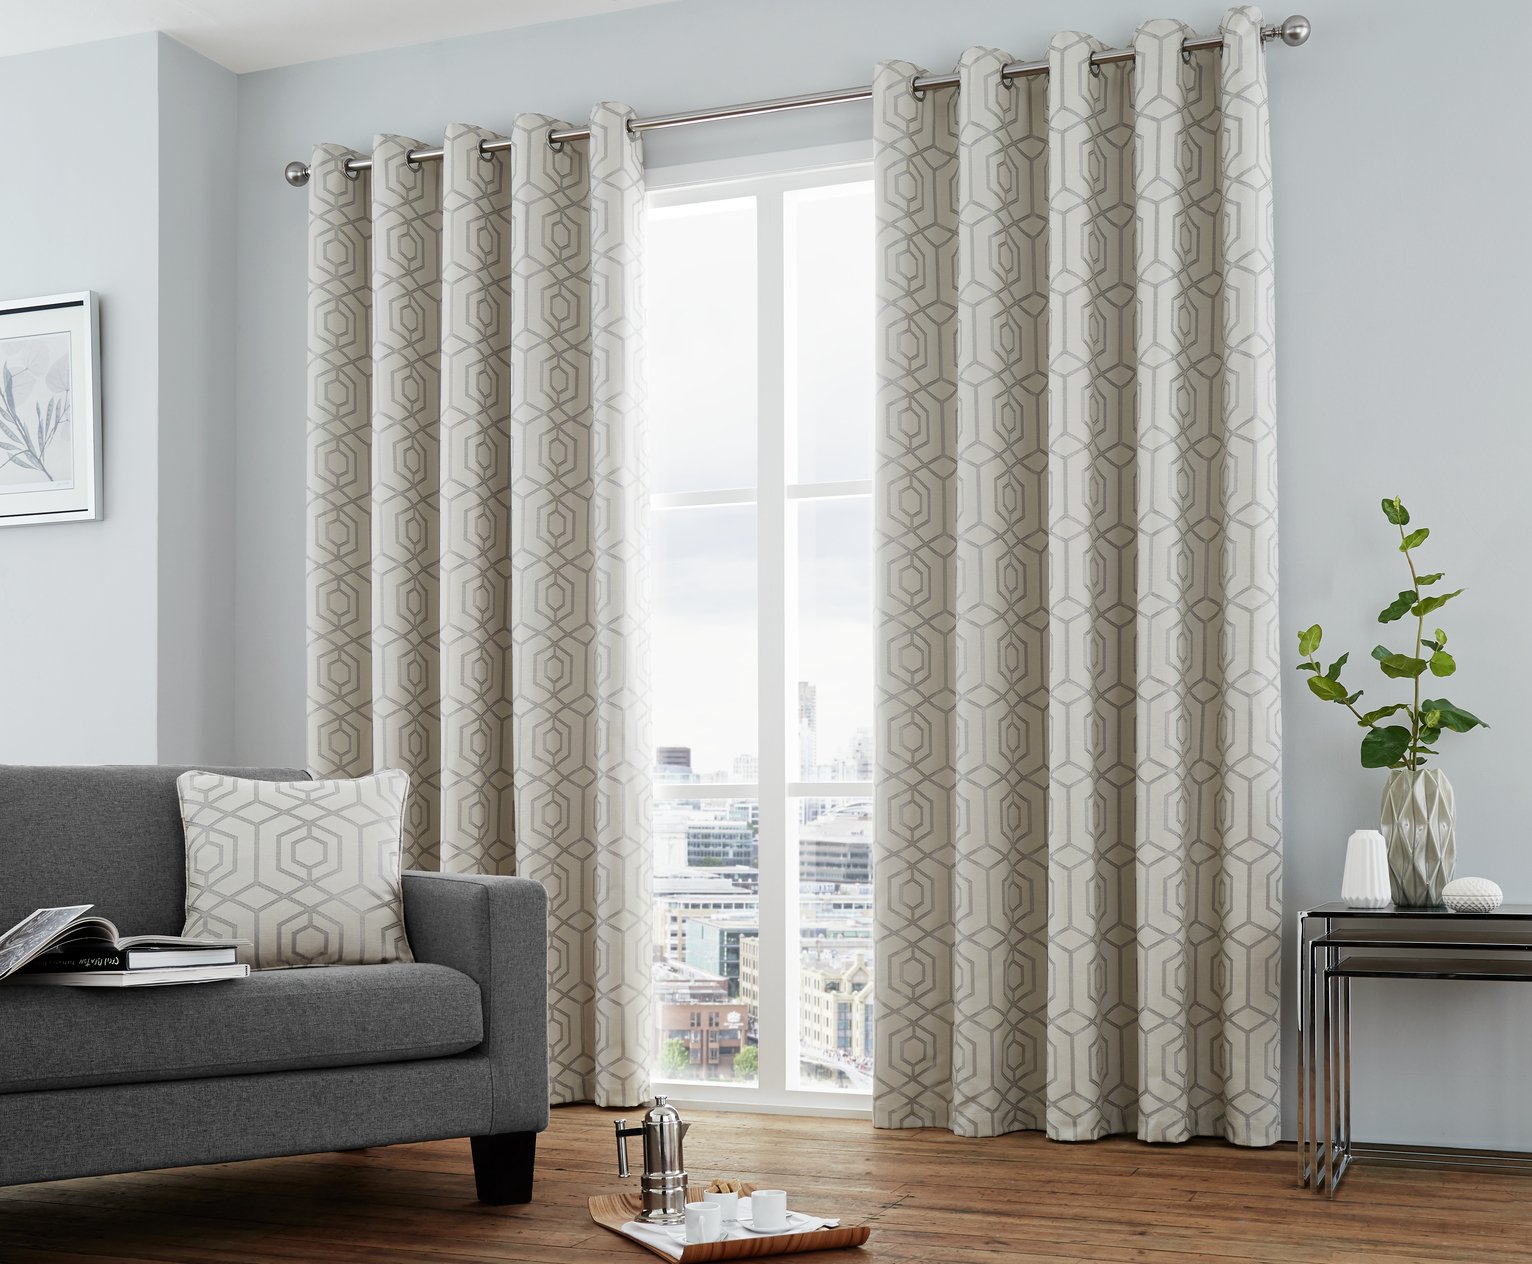 Curtina Camberwell Eyelet Curtains - 229x229cm - Silver